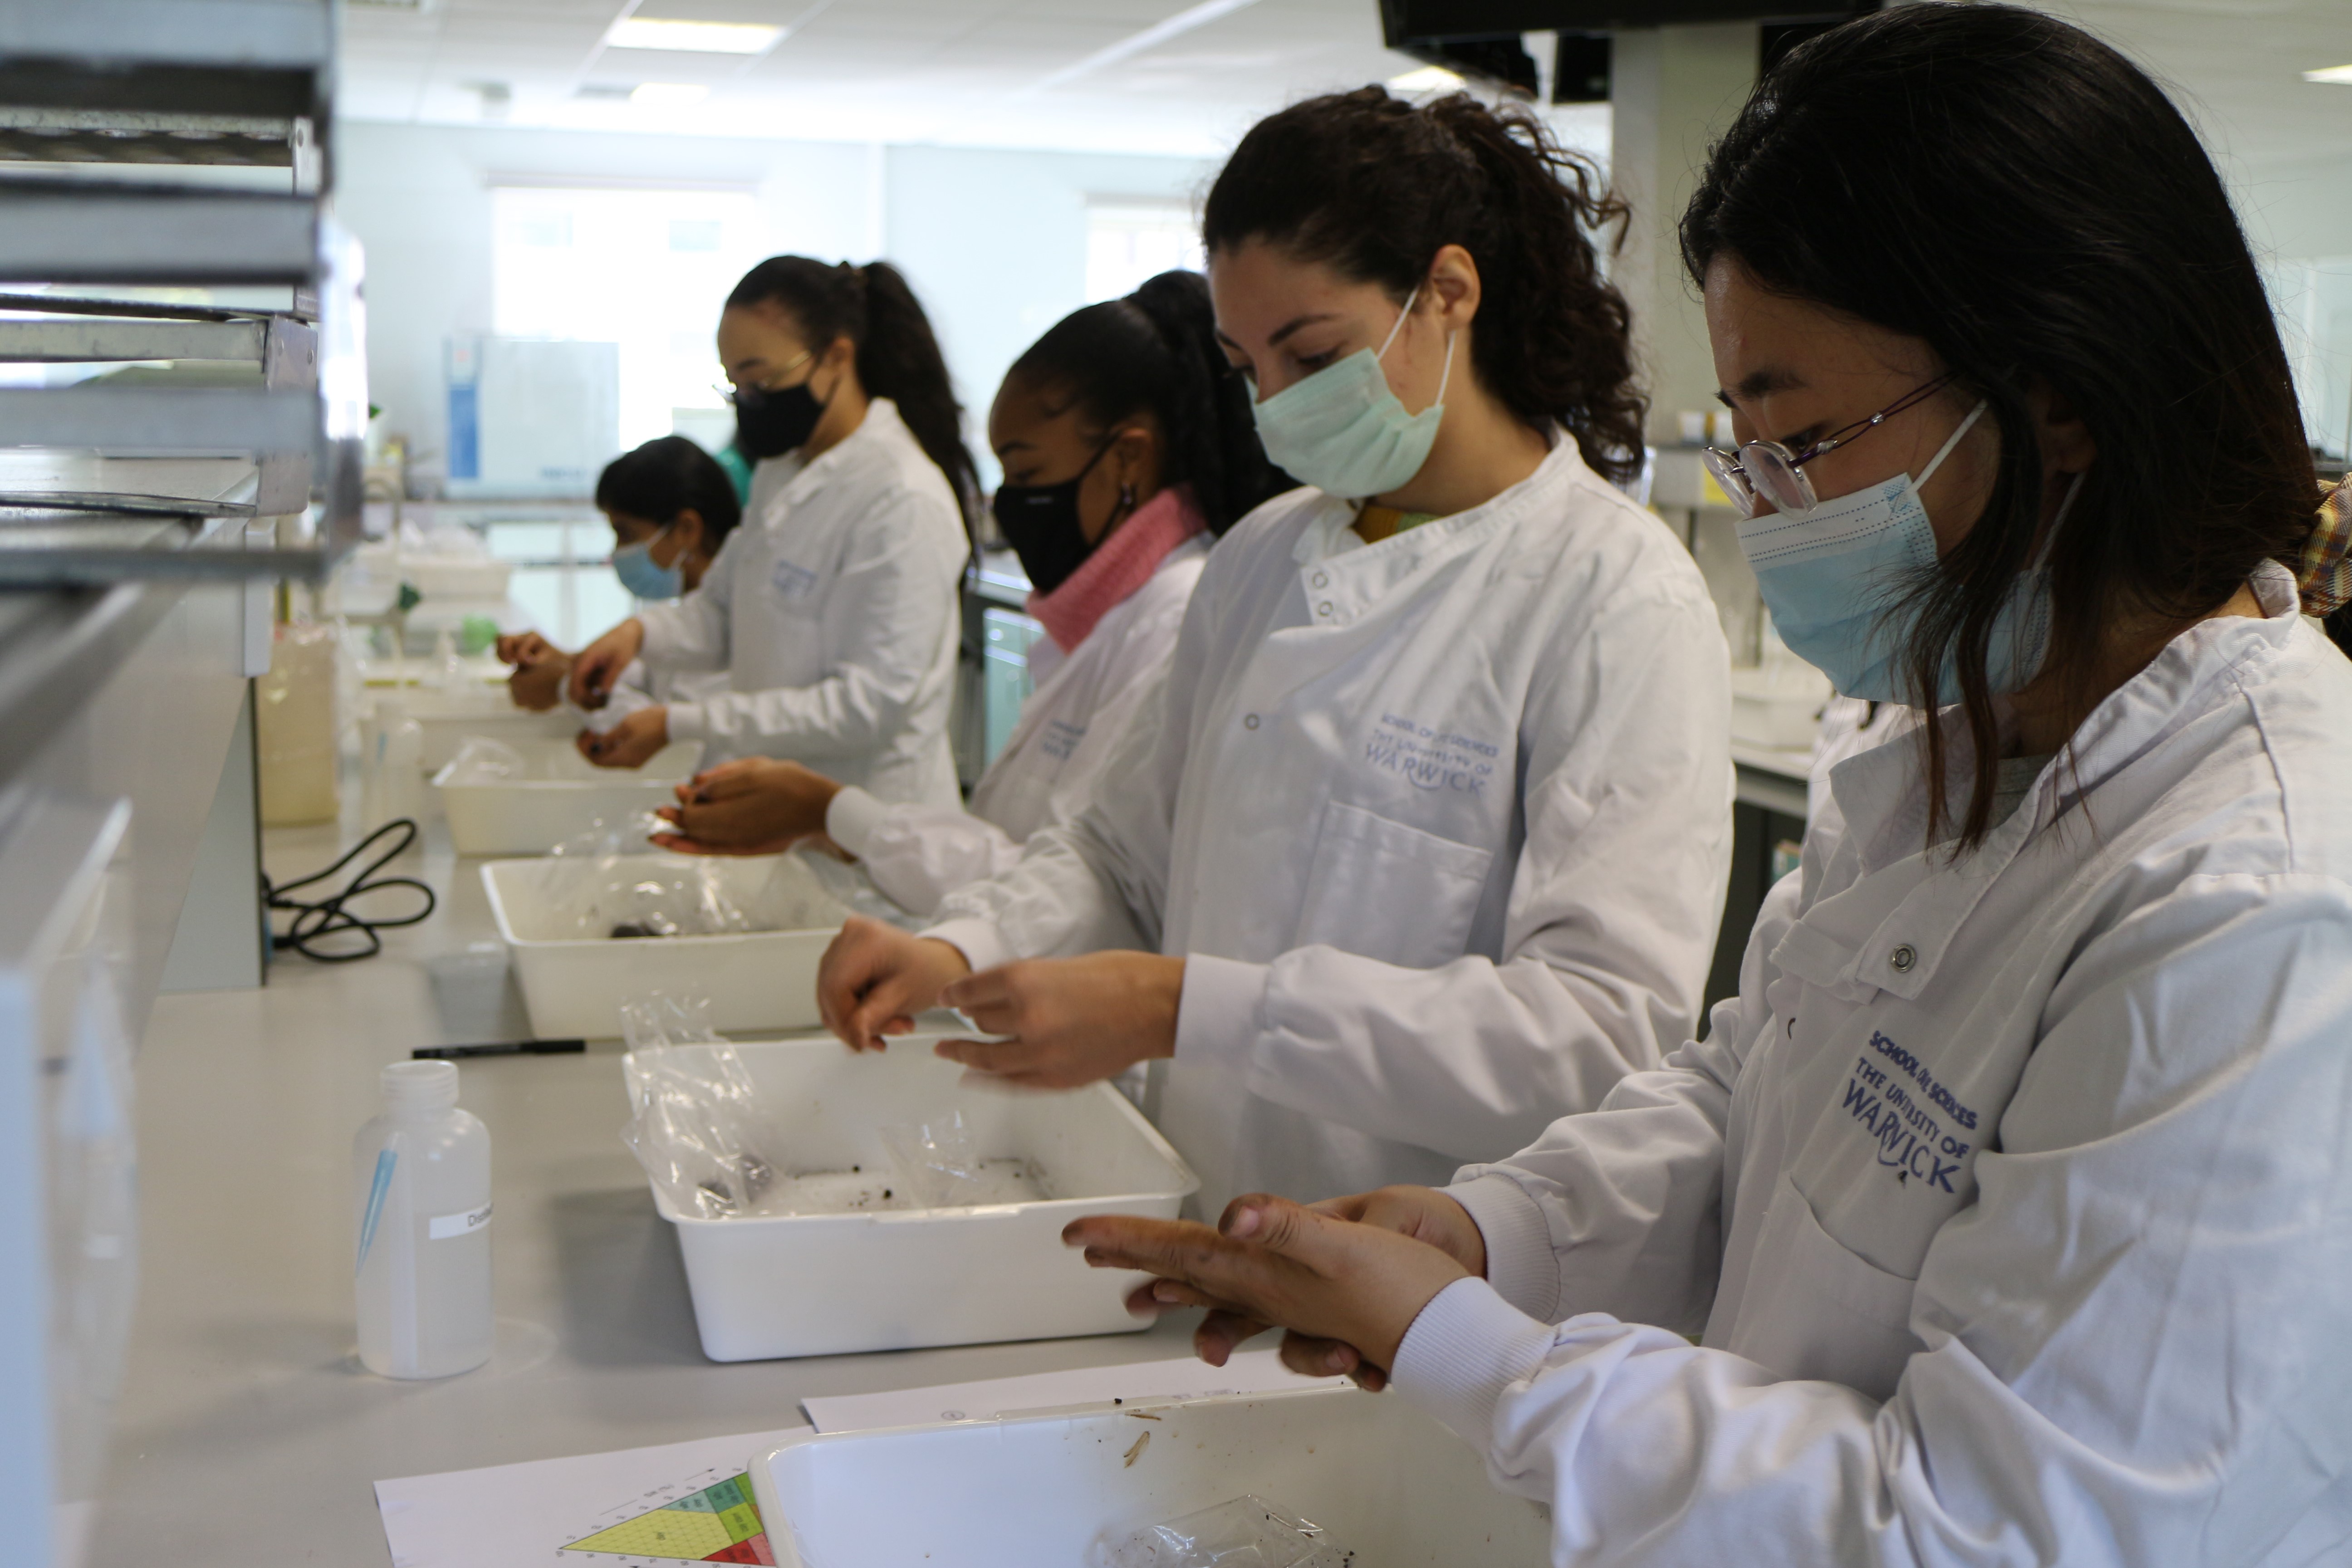 MASc students in the labs on campus looking at soil samples